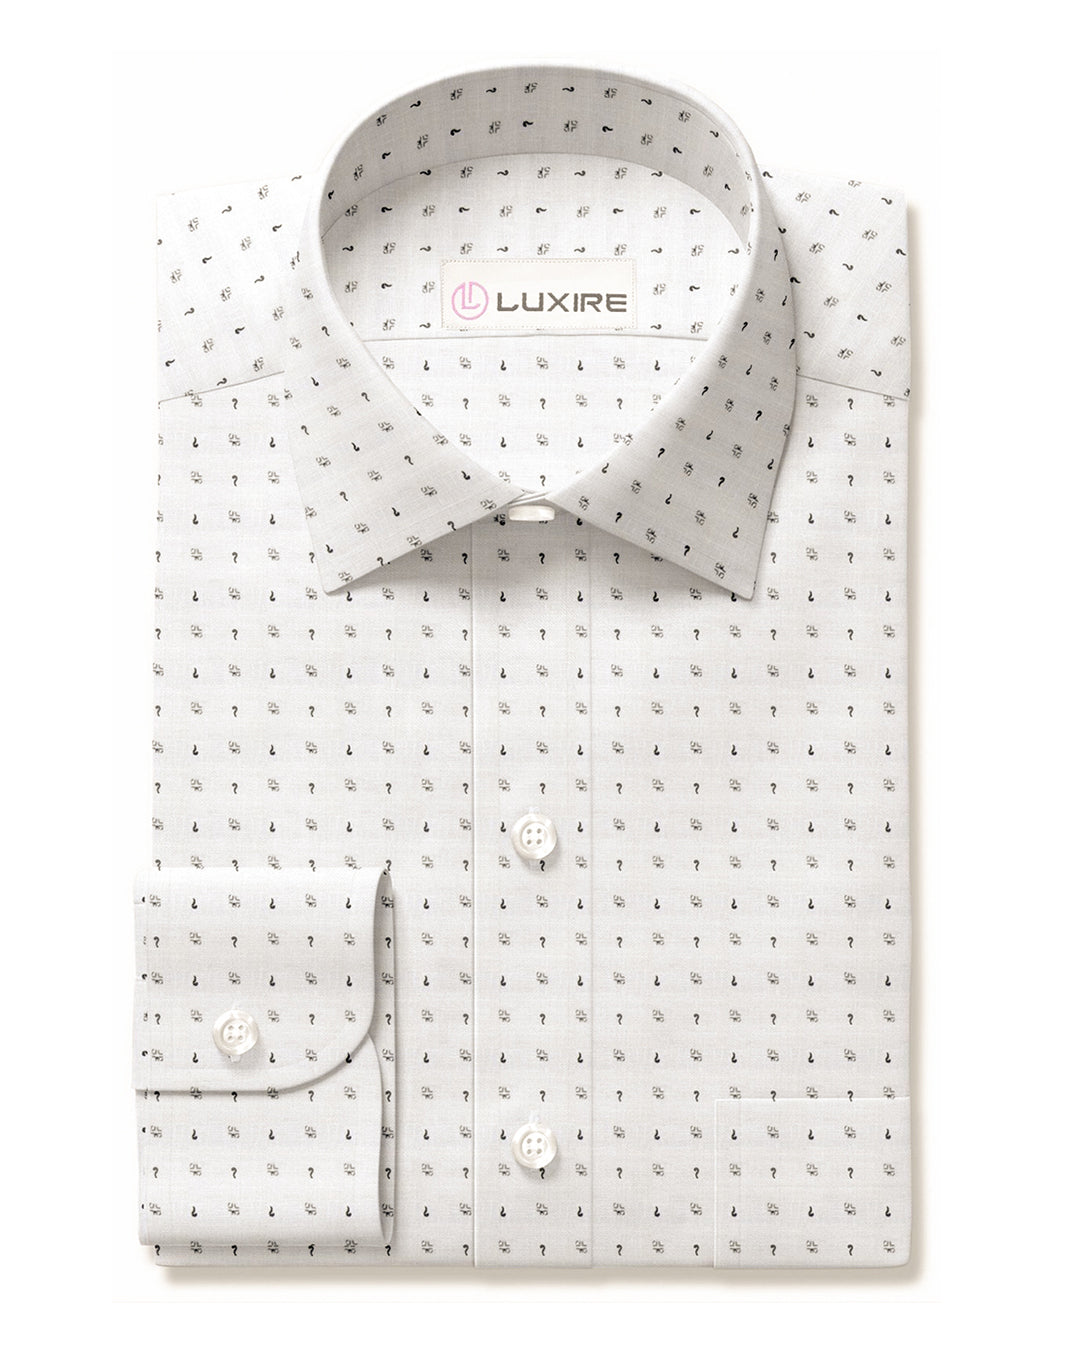 Linen: Grey Printed Marks On White